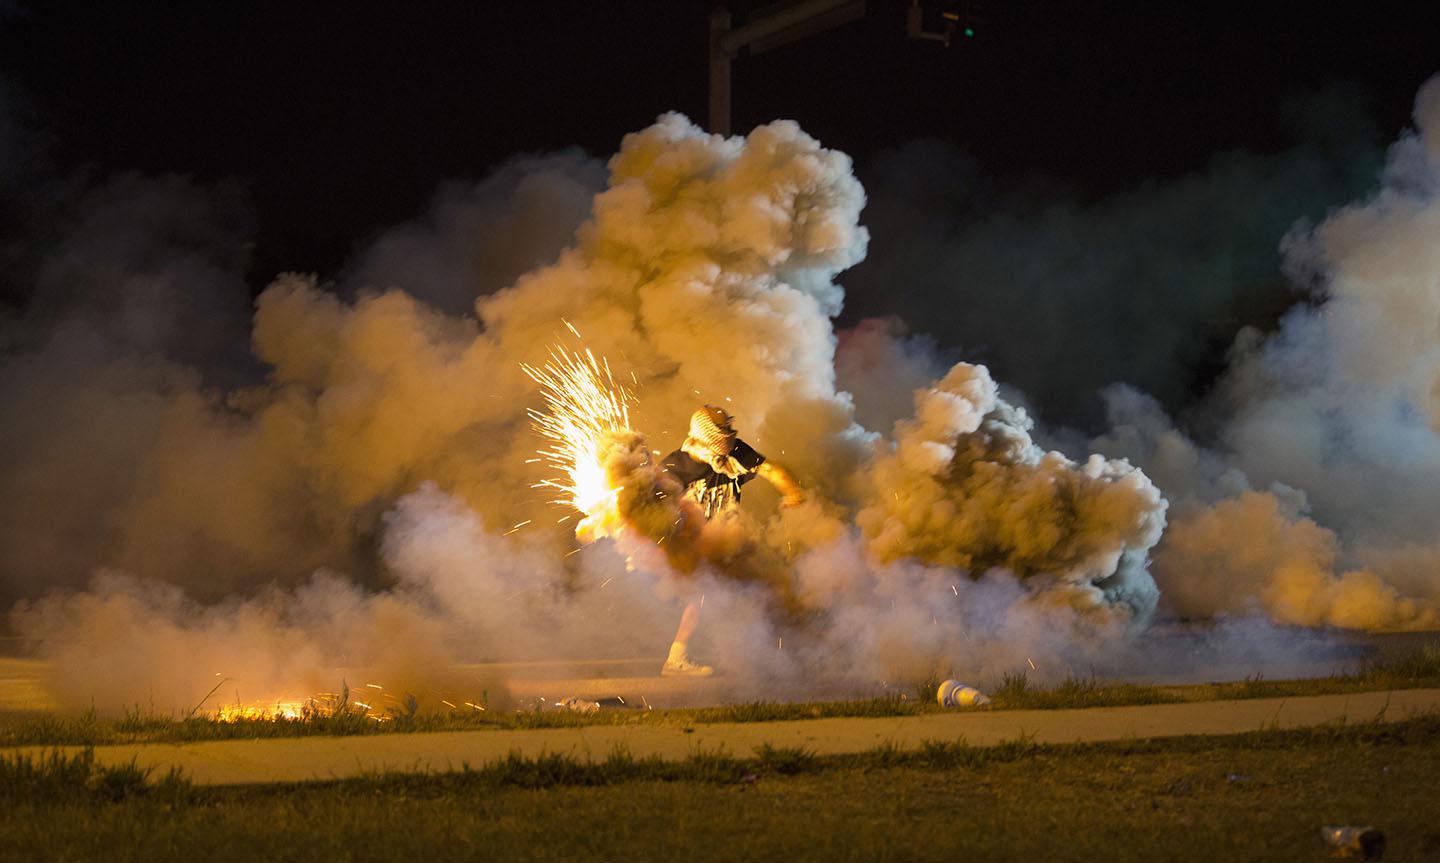 A protester throws back a smoke bomb while clashing with police in Ferguson, Missouri August 13, 2014.